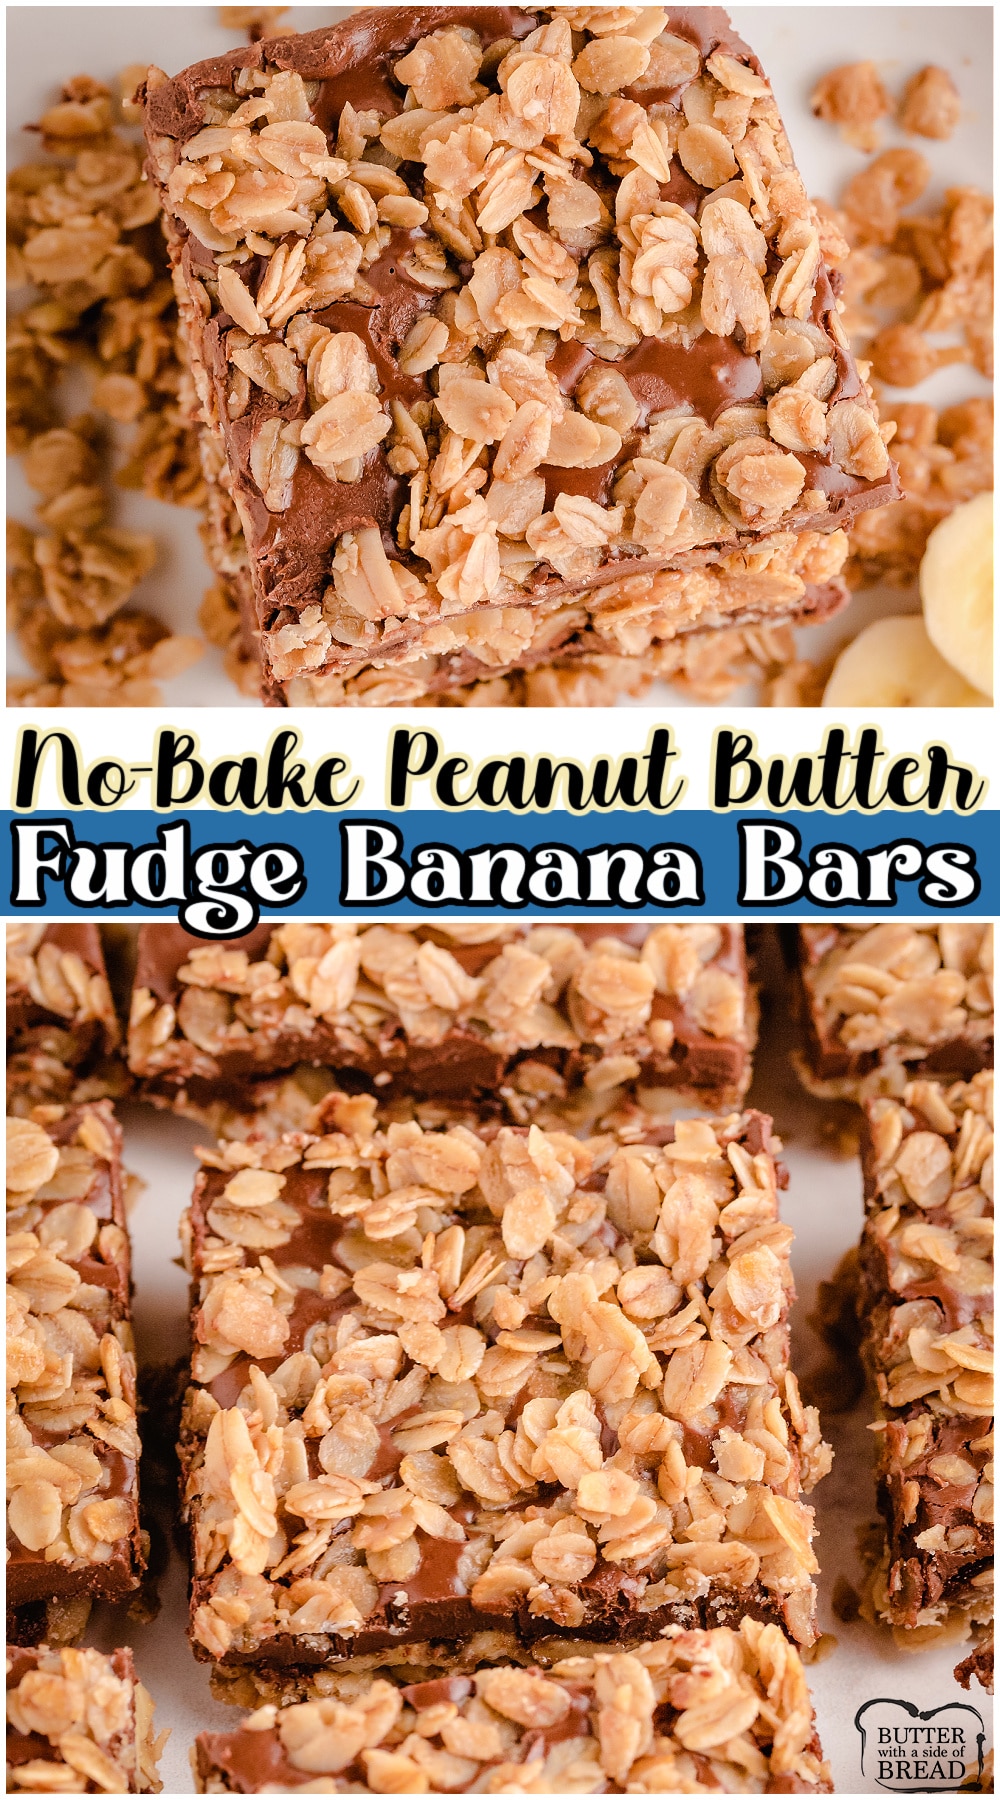 No-bake peanut butter banana fudge bars made with banana, oats, & peanut butter that are perfect for breakfast or an afternoon snack! Easy peanut butter chocolate recipe made quick & is super tasty!